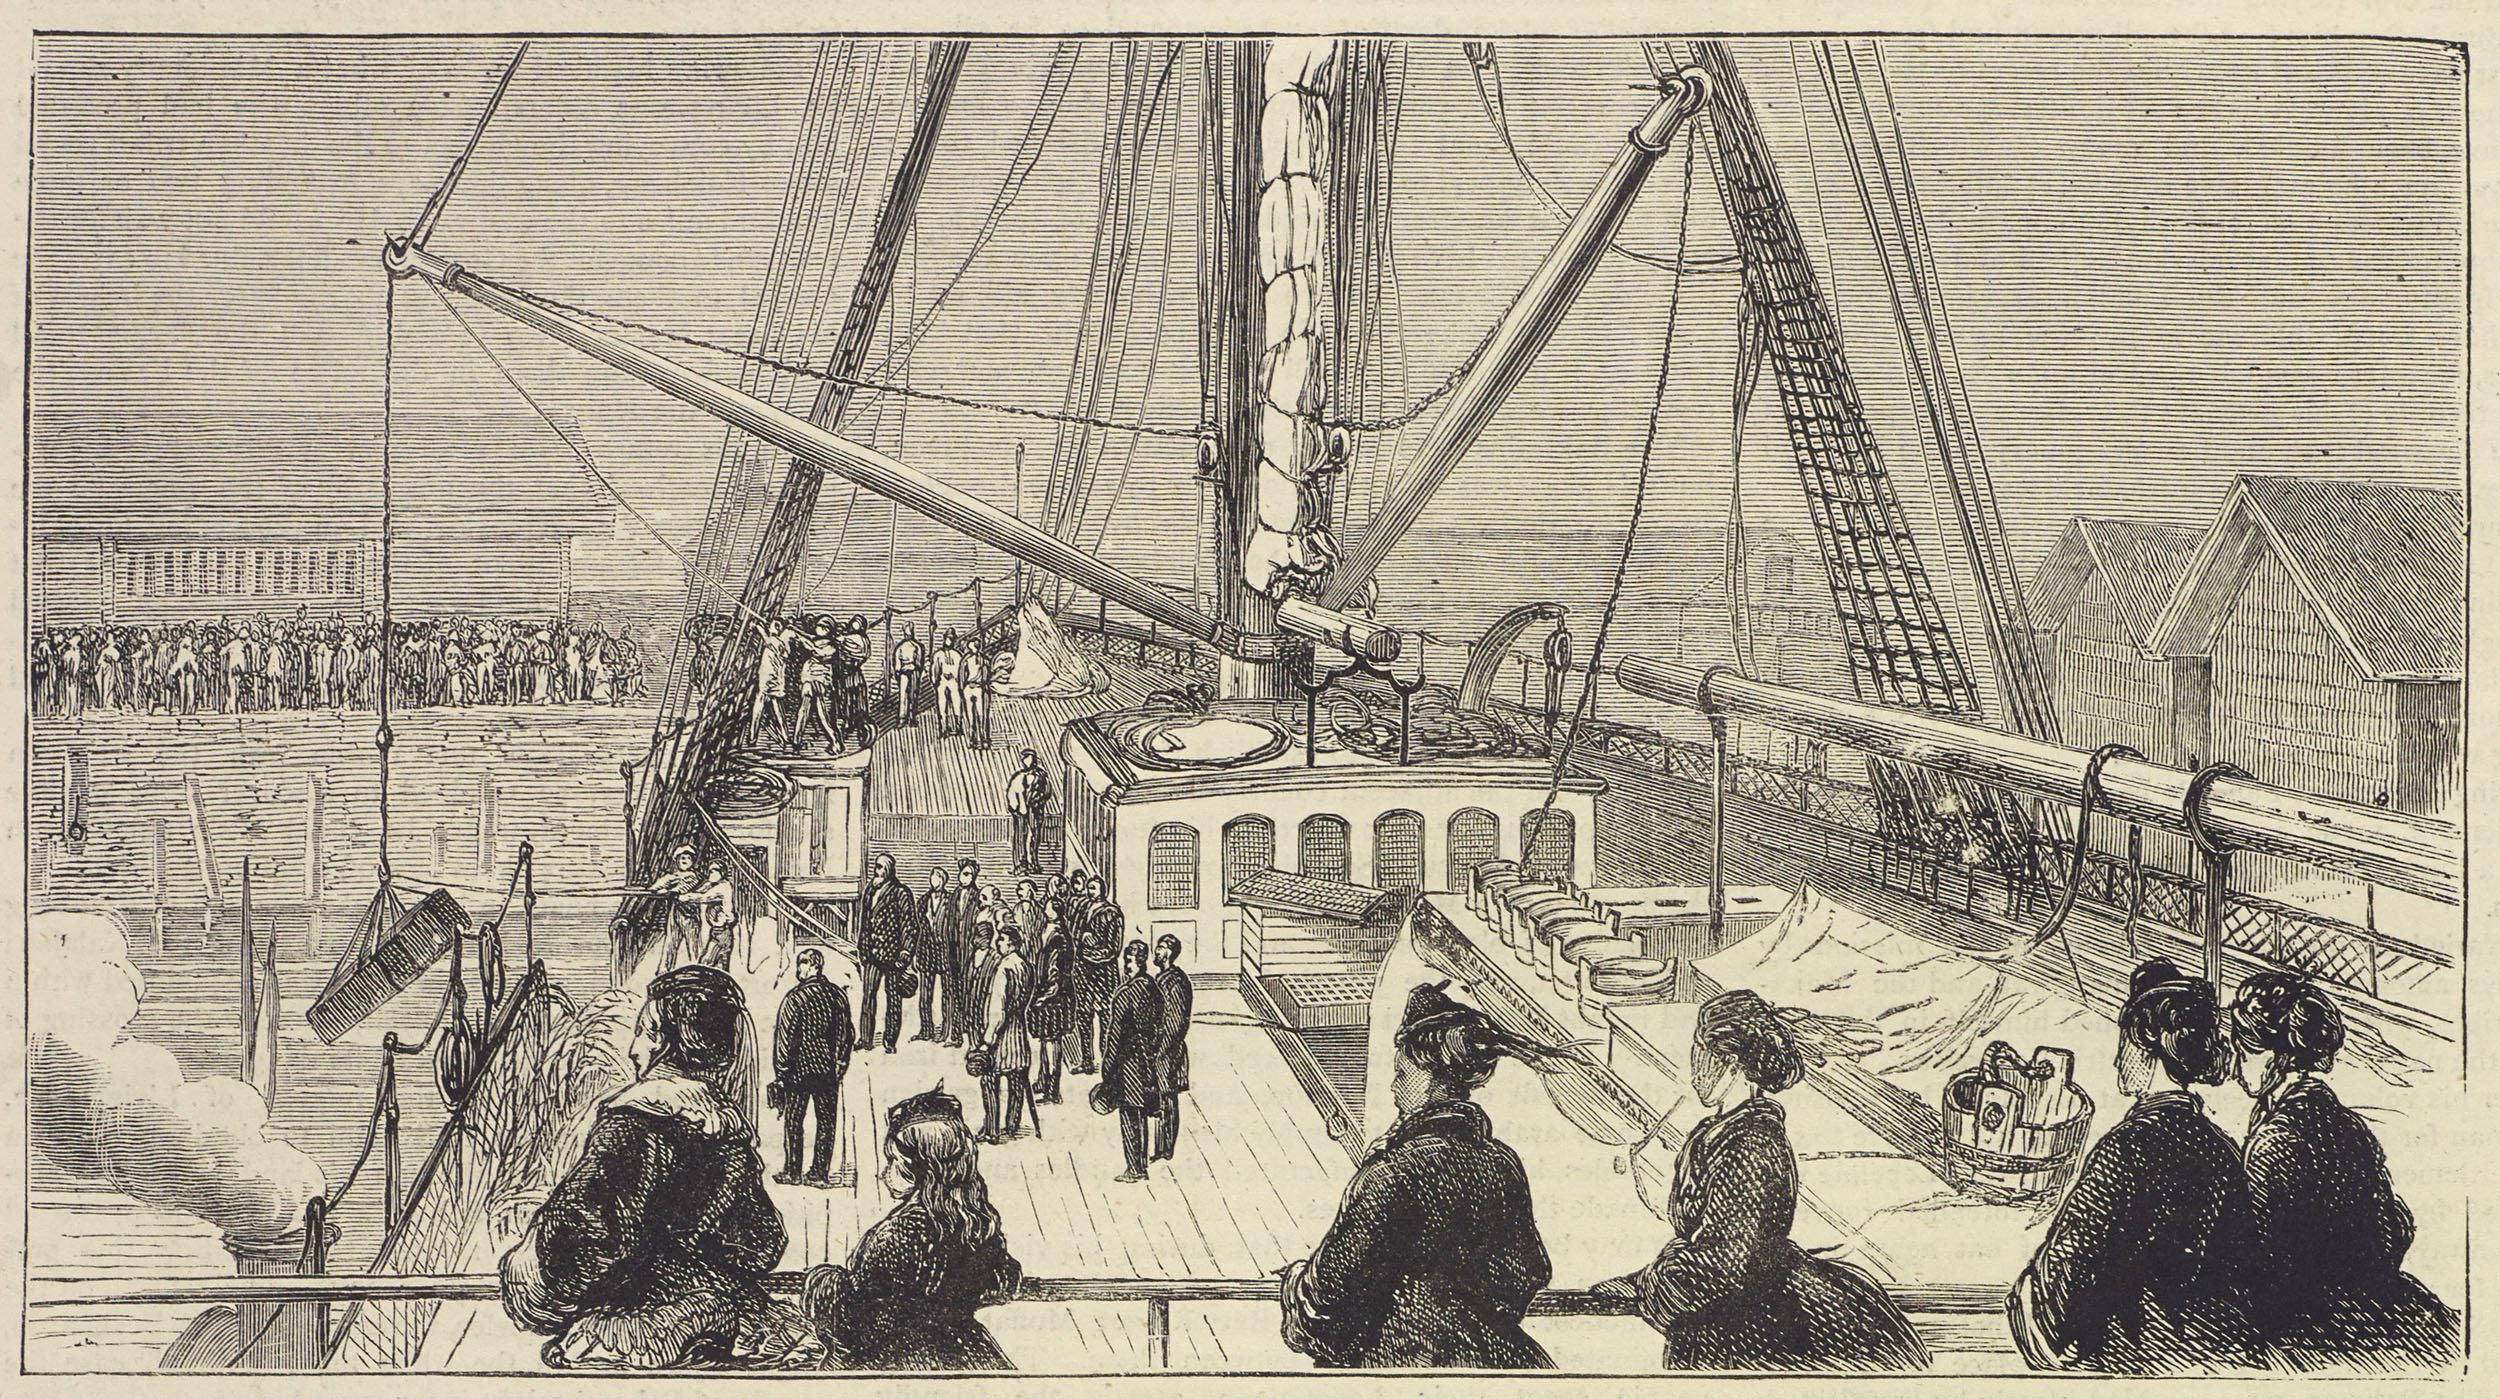 Removing the Body from  the 'Malwa' to the Tender 'Queen.' Illustration from 'The Life and Labours of David Livingstone' (Stanley 1874:396). Copyright National Library of Scotland. Creative Commons Share-alike 2.5 UK: Scotland (https://creativecommons.org/licenses/by-nc-sa/2.5/scotland/).